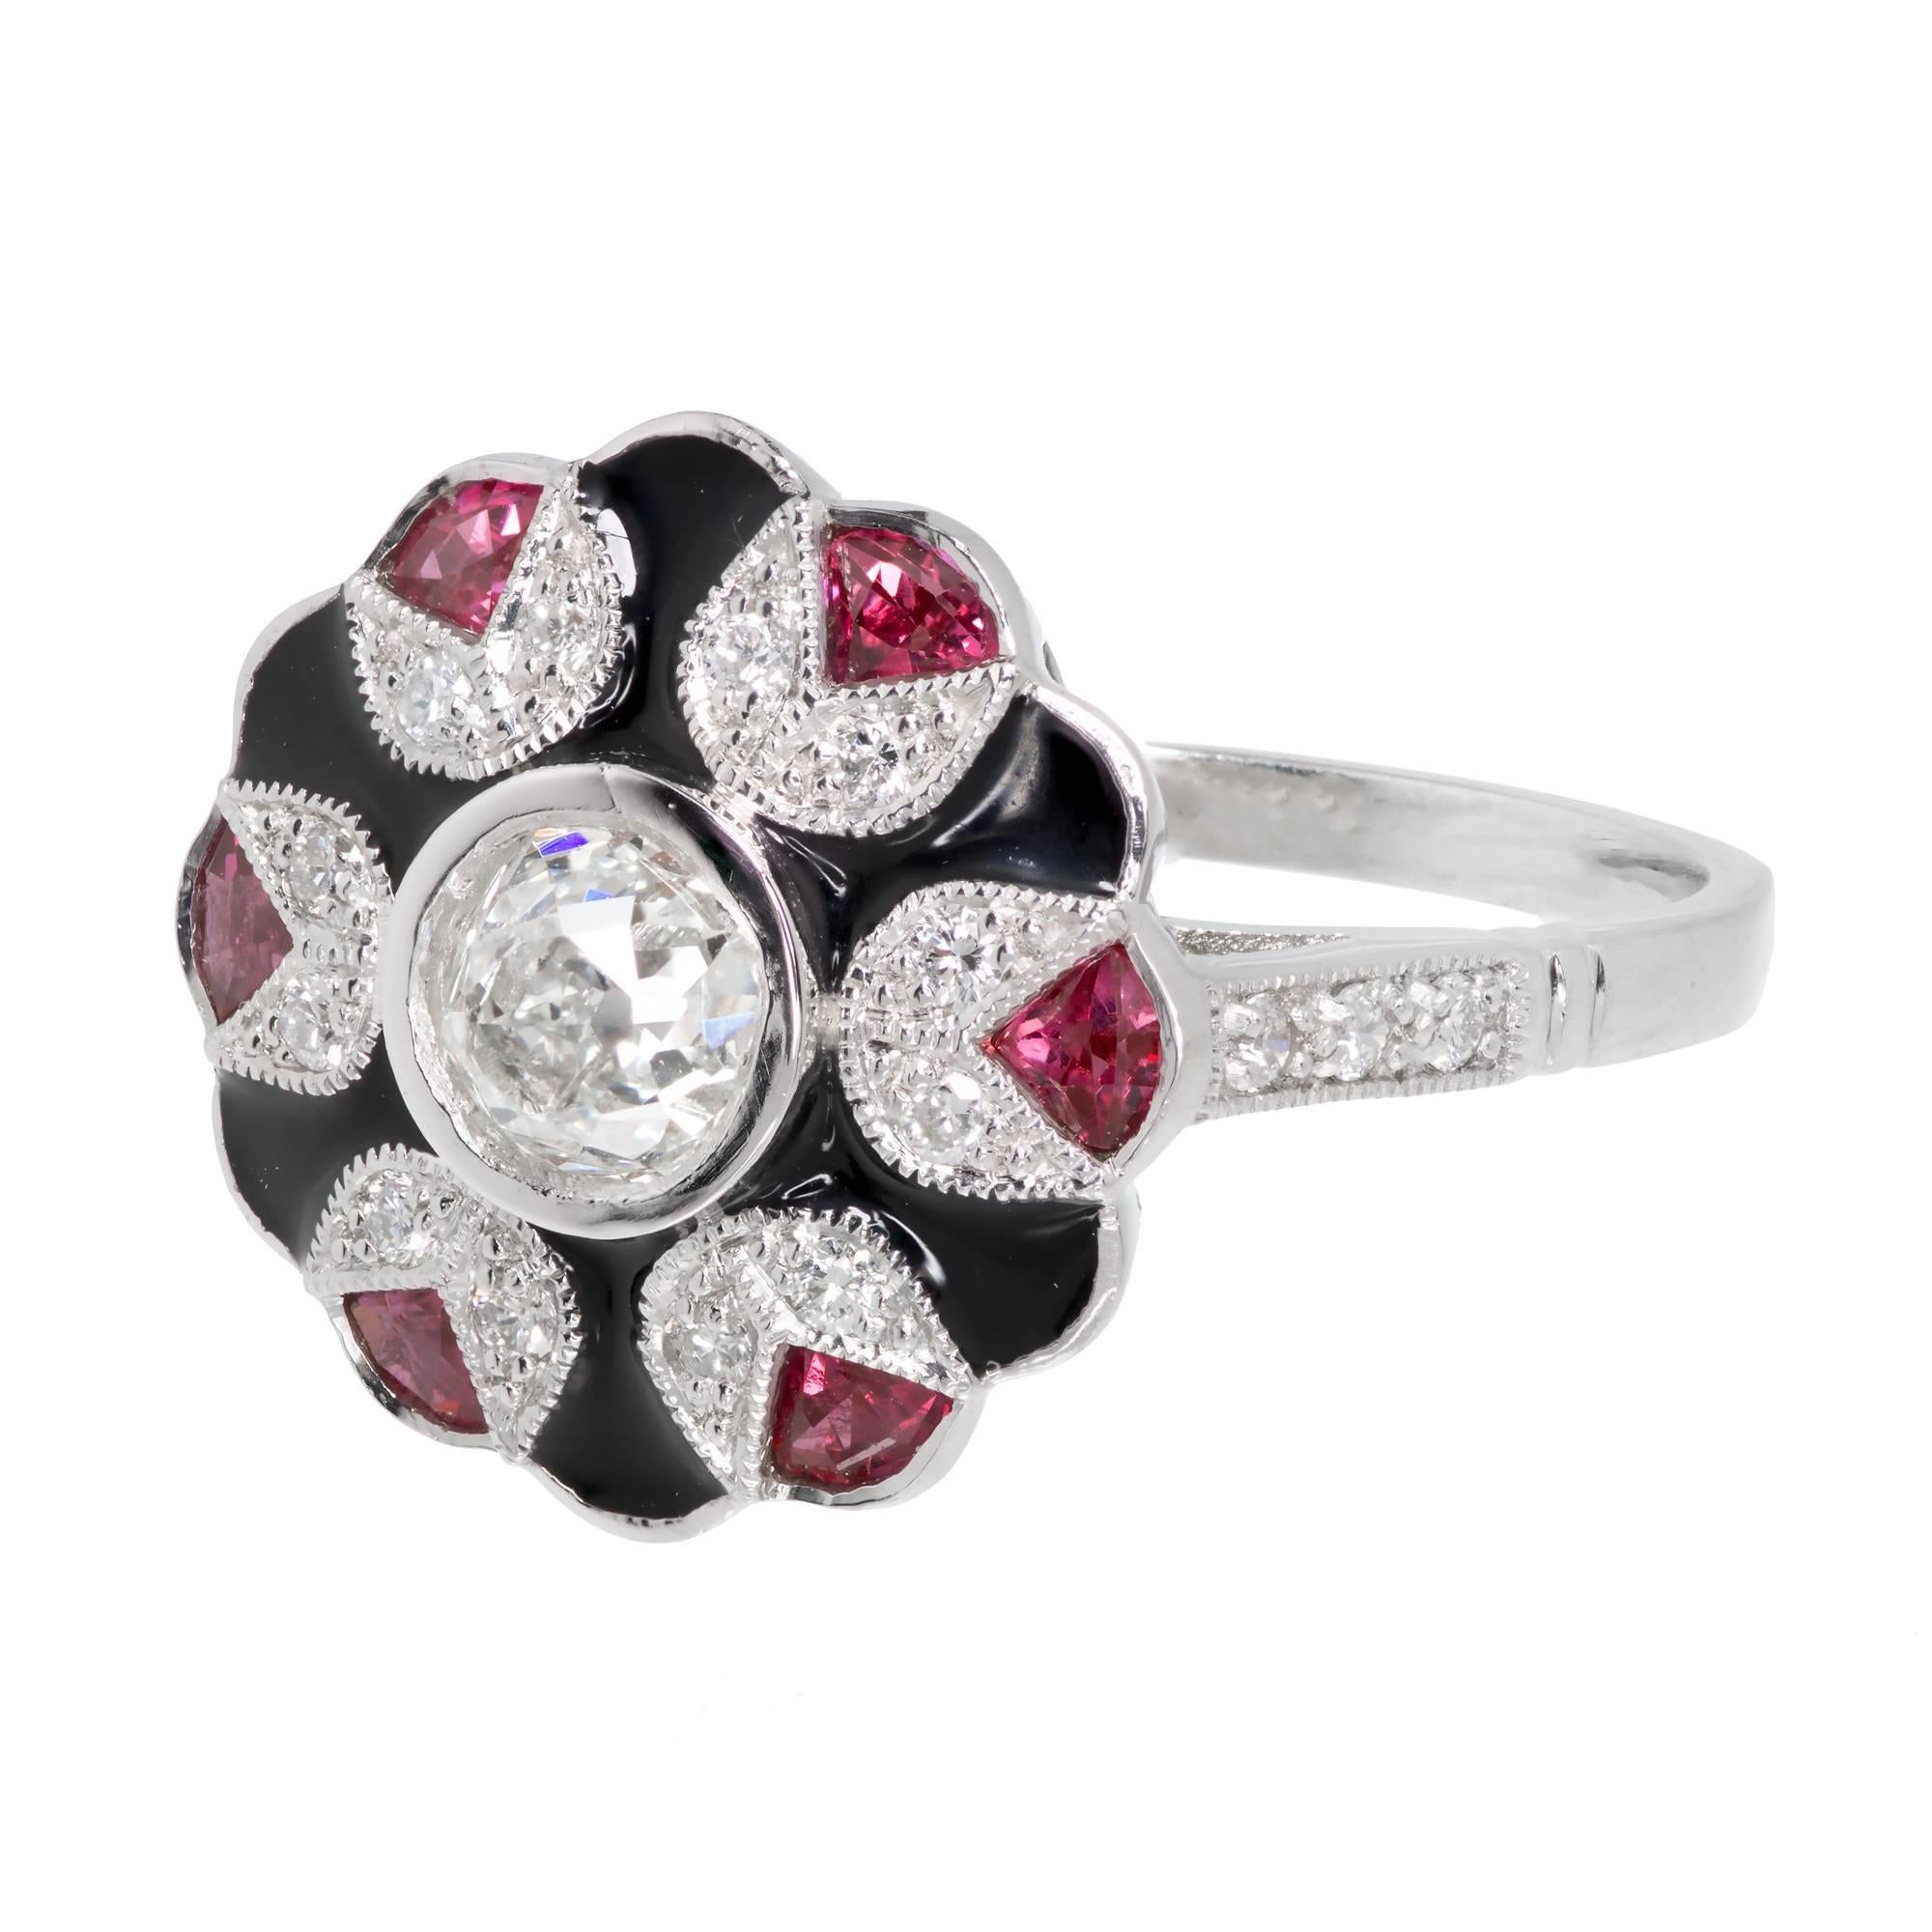 Platinum ring with black enamel separating natural bright red Rubies and old mine brilliant cut diamond with a raised crown and small table with lots of sparkle

1 old mine brilliant cut diamond, approx. total weight .62cts, I, VS1, GIA certificate